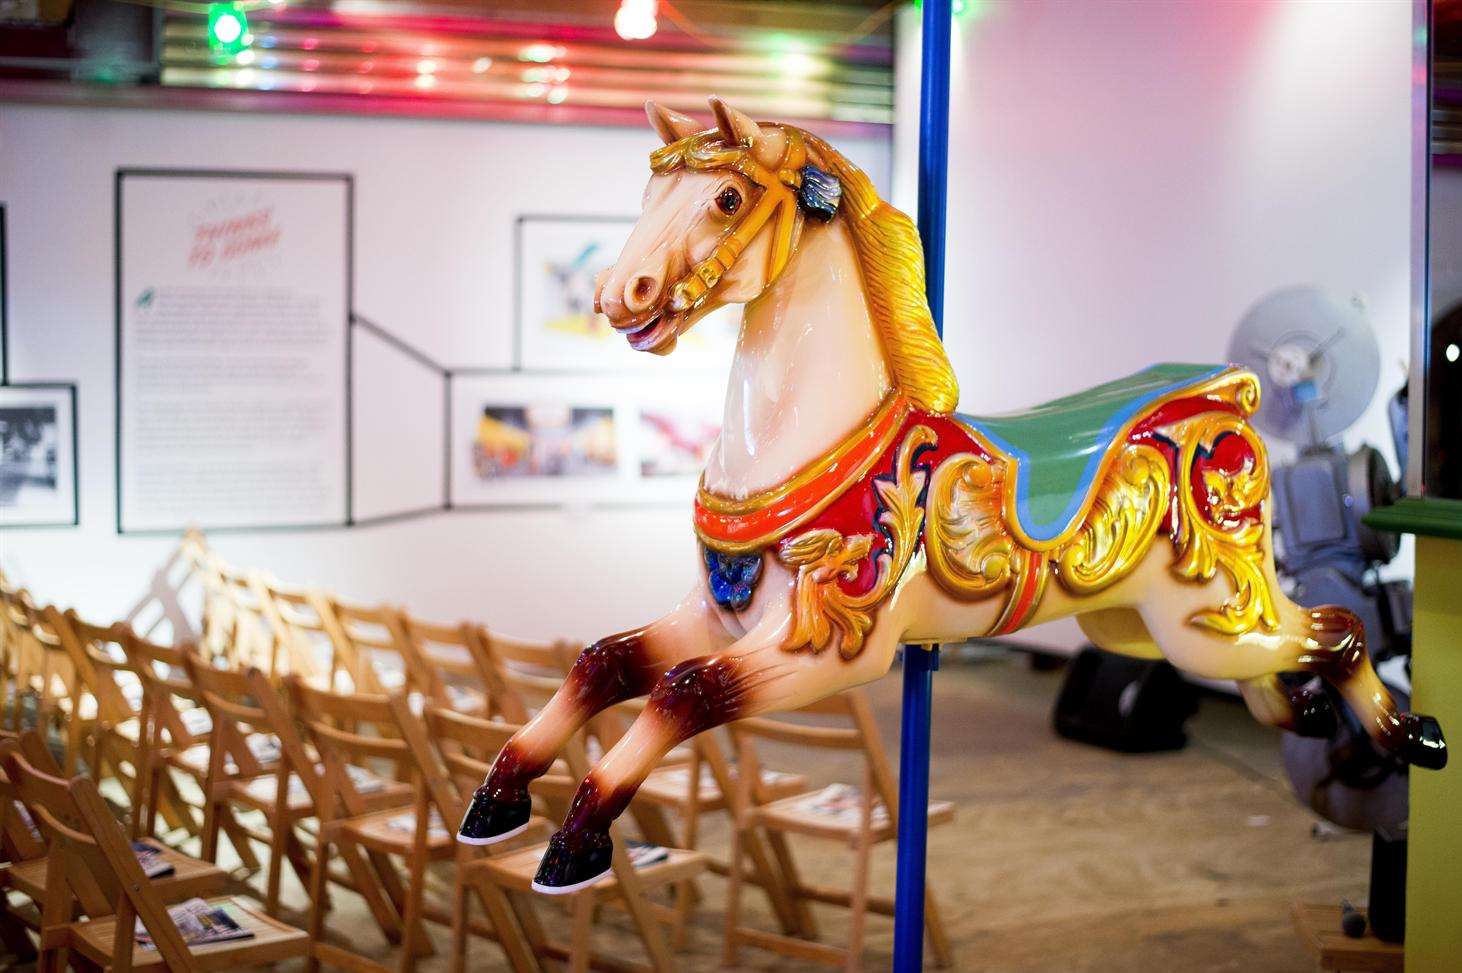 Some classic rides feature in the exhibition. Picture: Paul Webb / Dreamland Trust